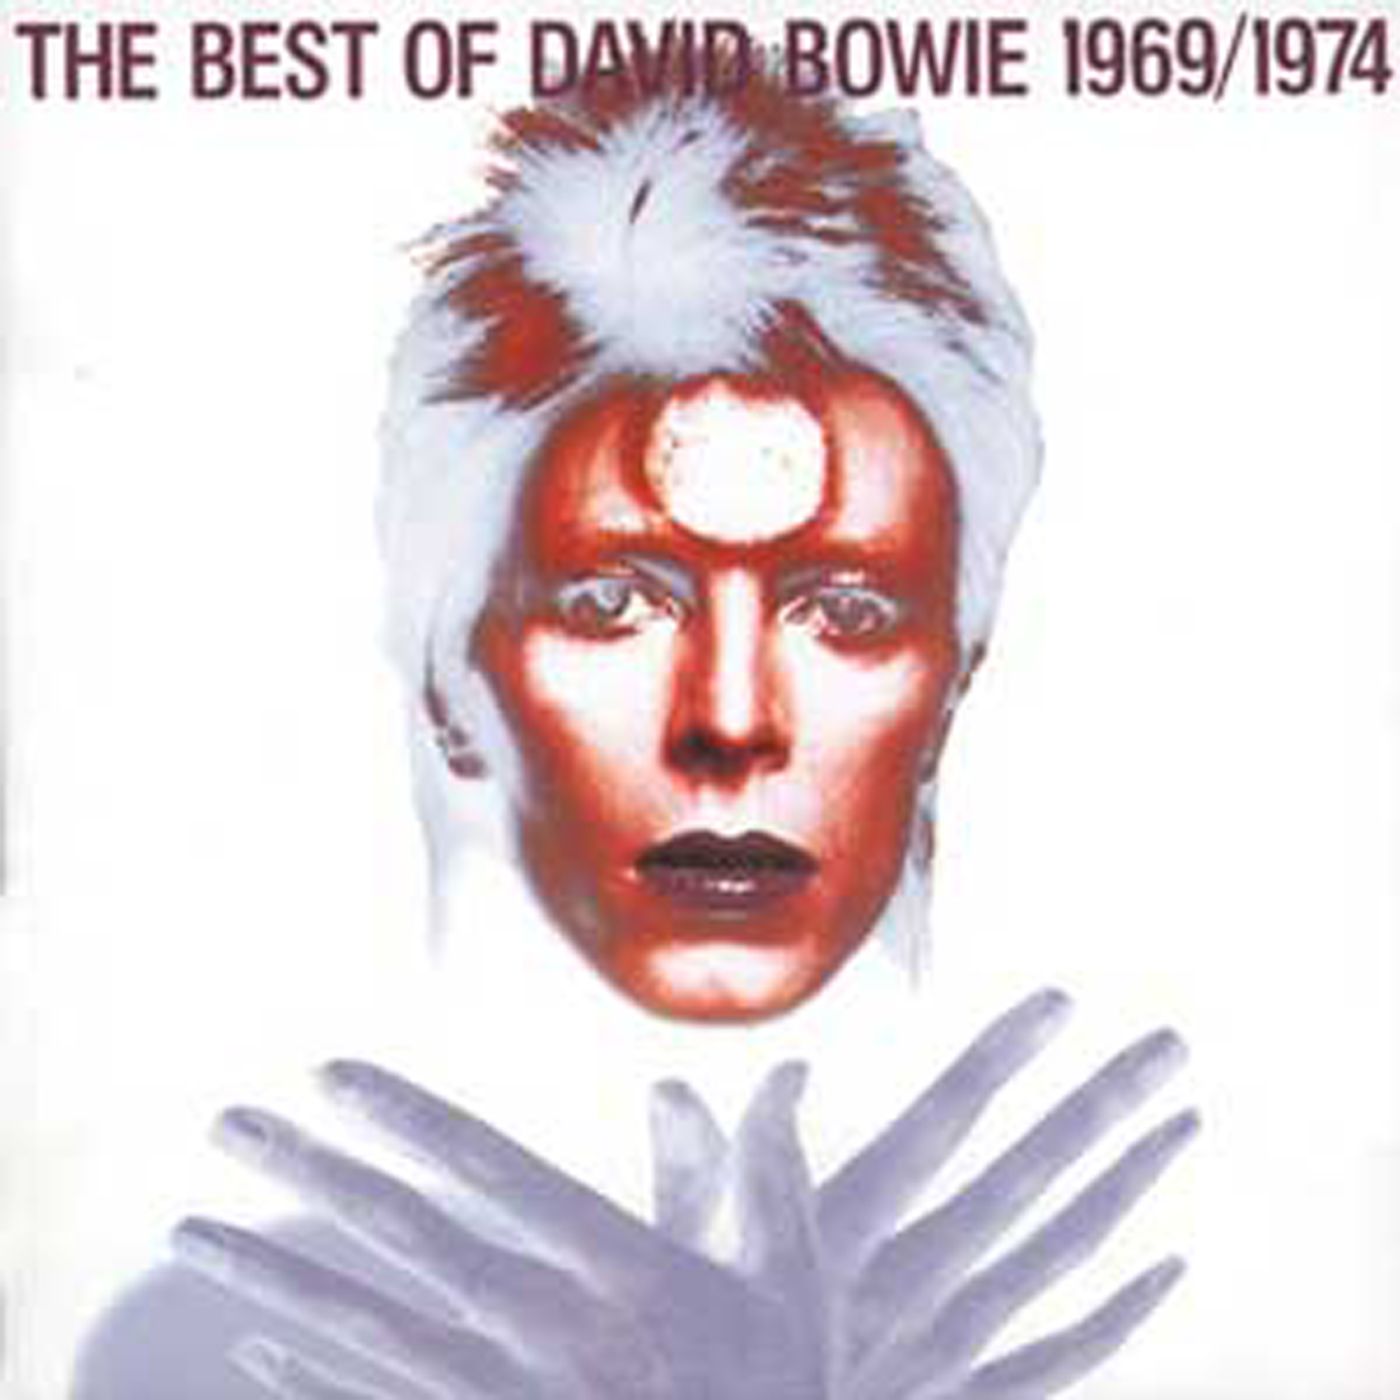 The Best of David Bowie 1969 - 1974